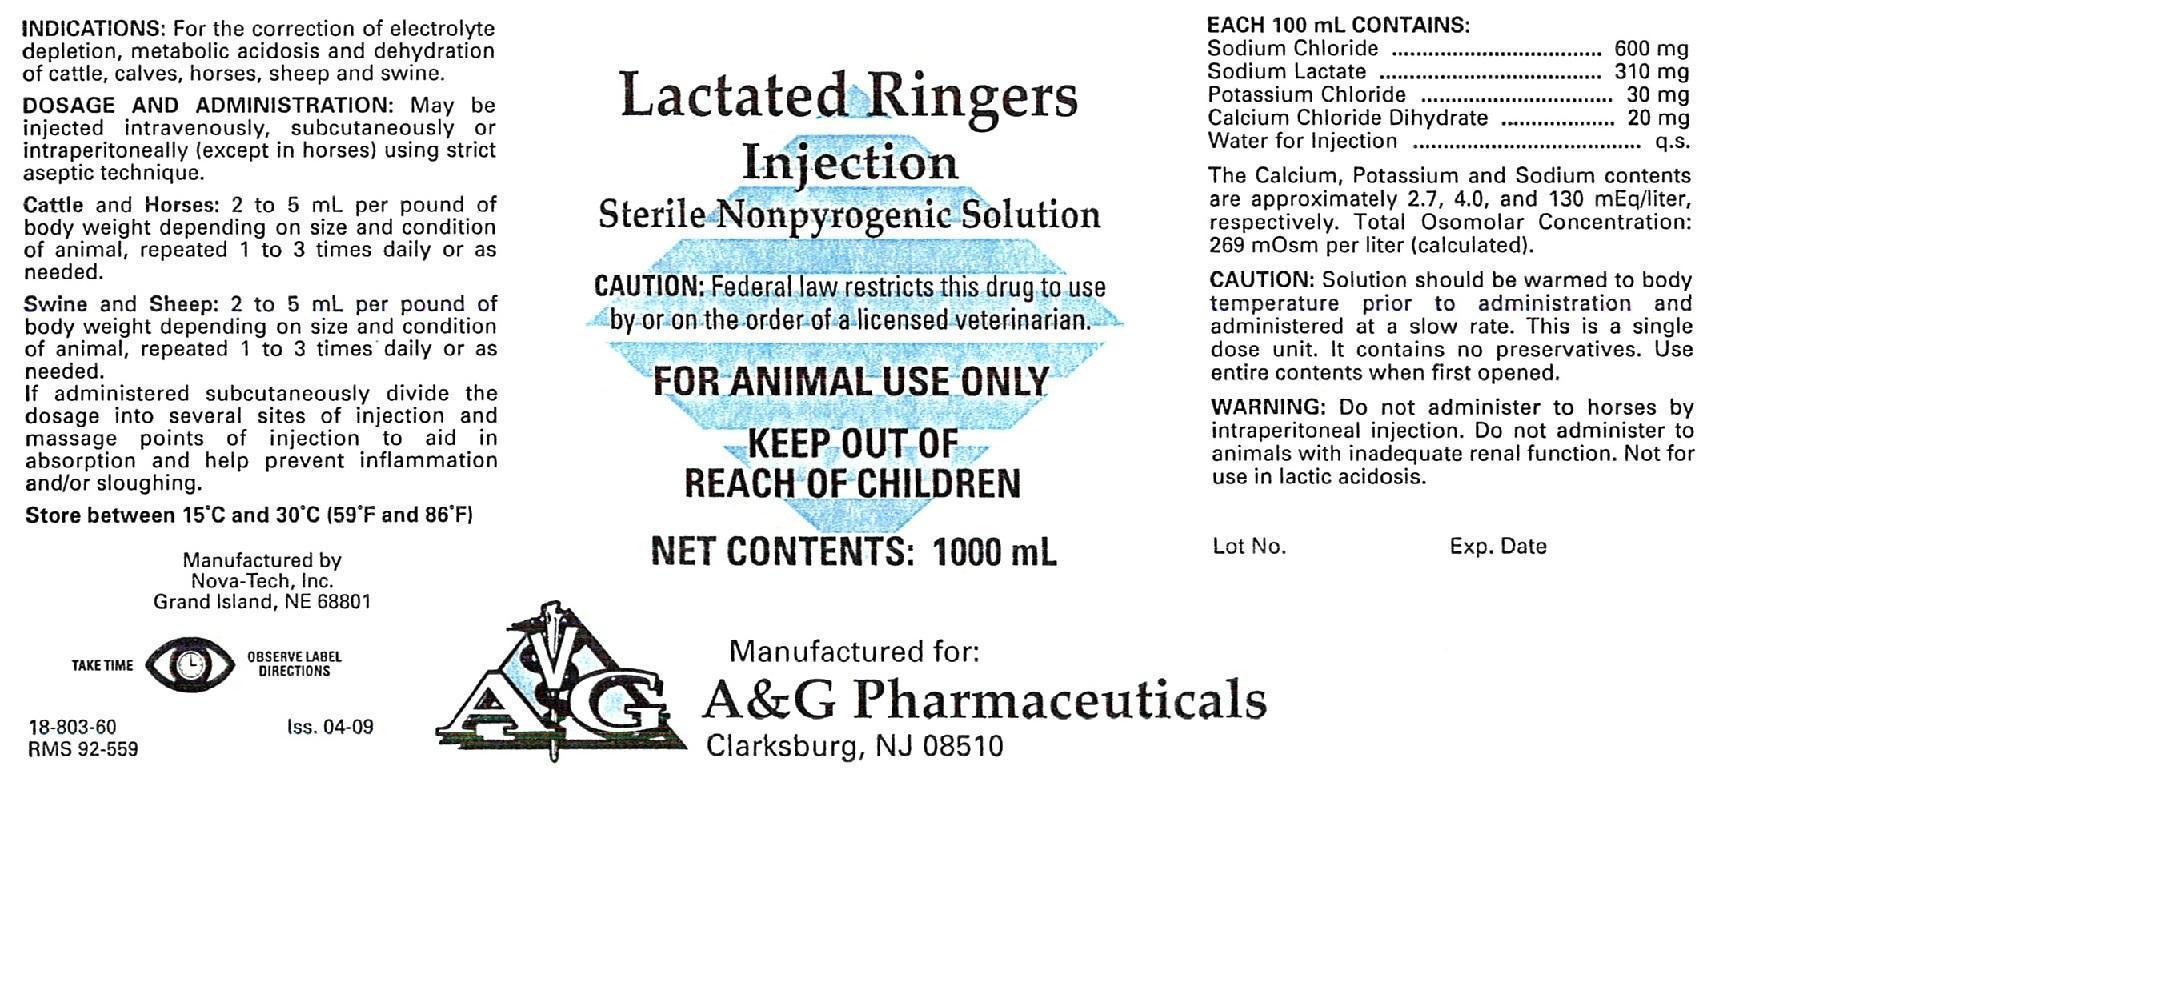 Lactated Ringers (Lactated Ringers) Injection, Solution [A & G Pharmaceuticals, Inc.]